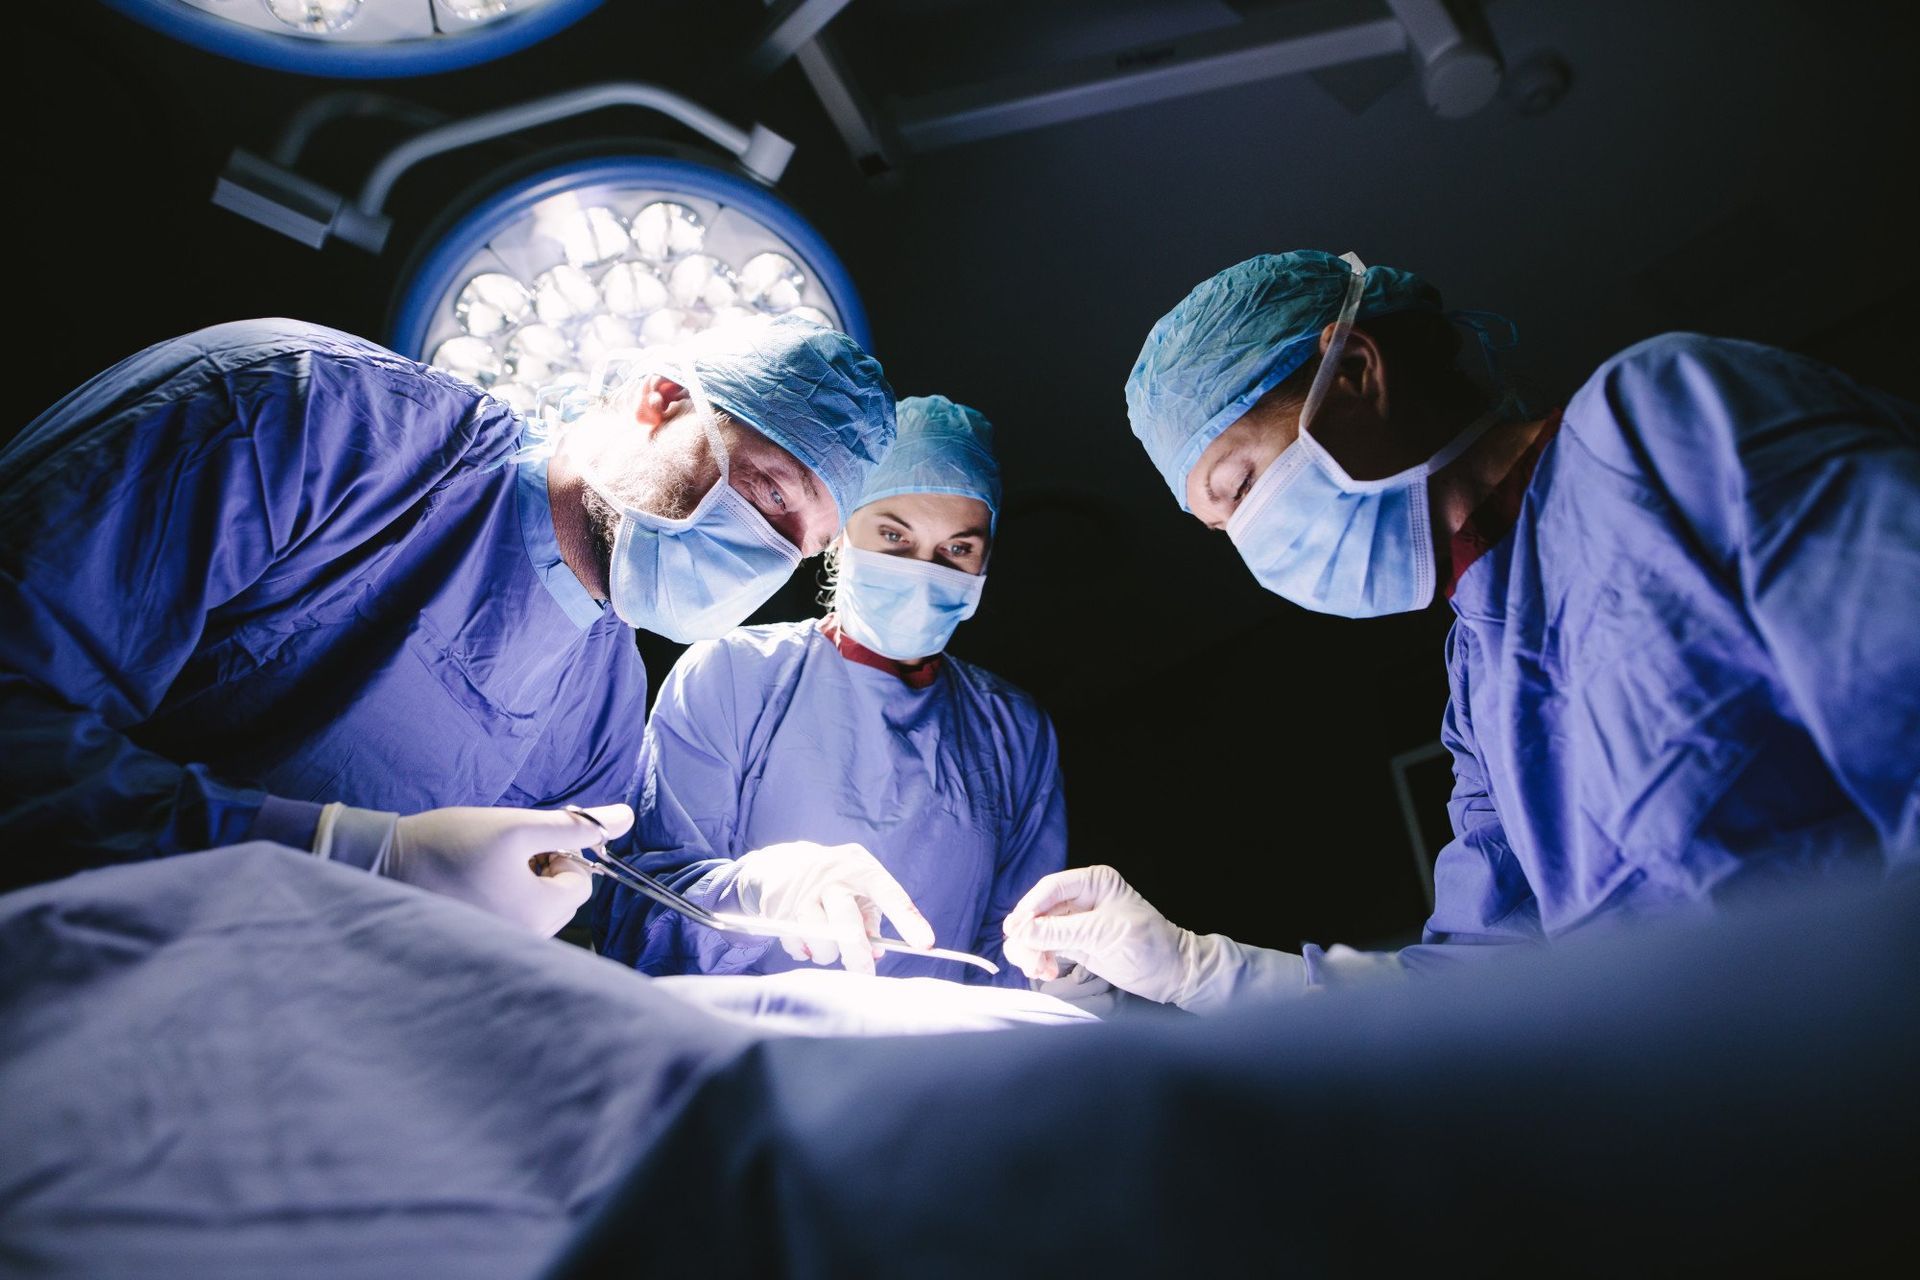 three surgeons at work on a patient